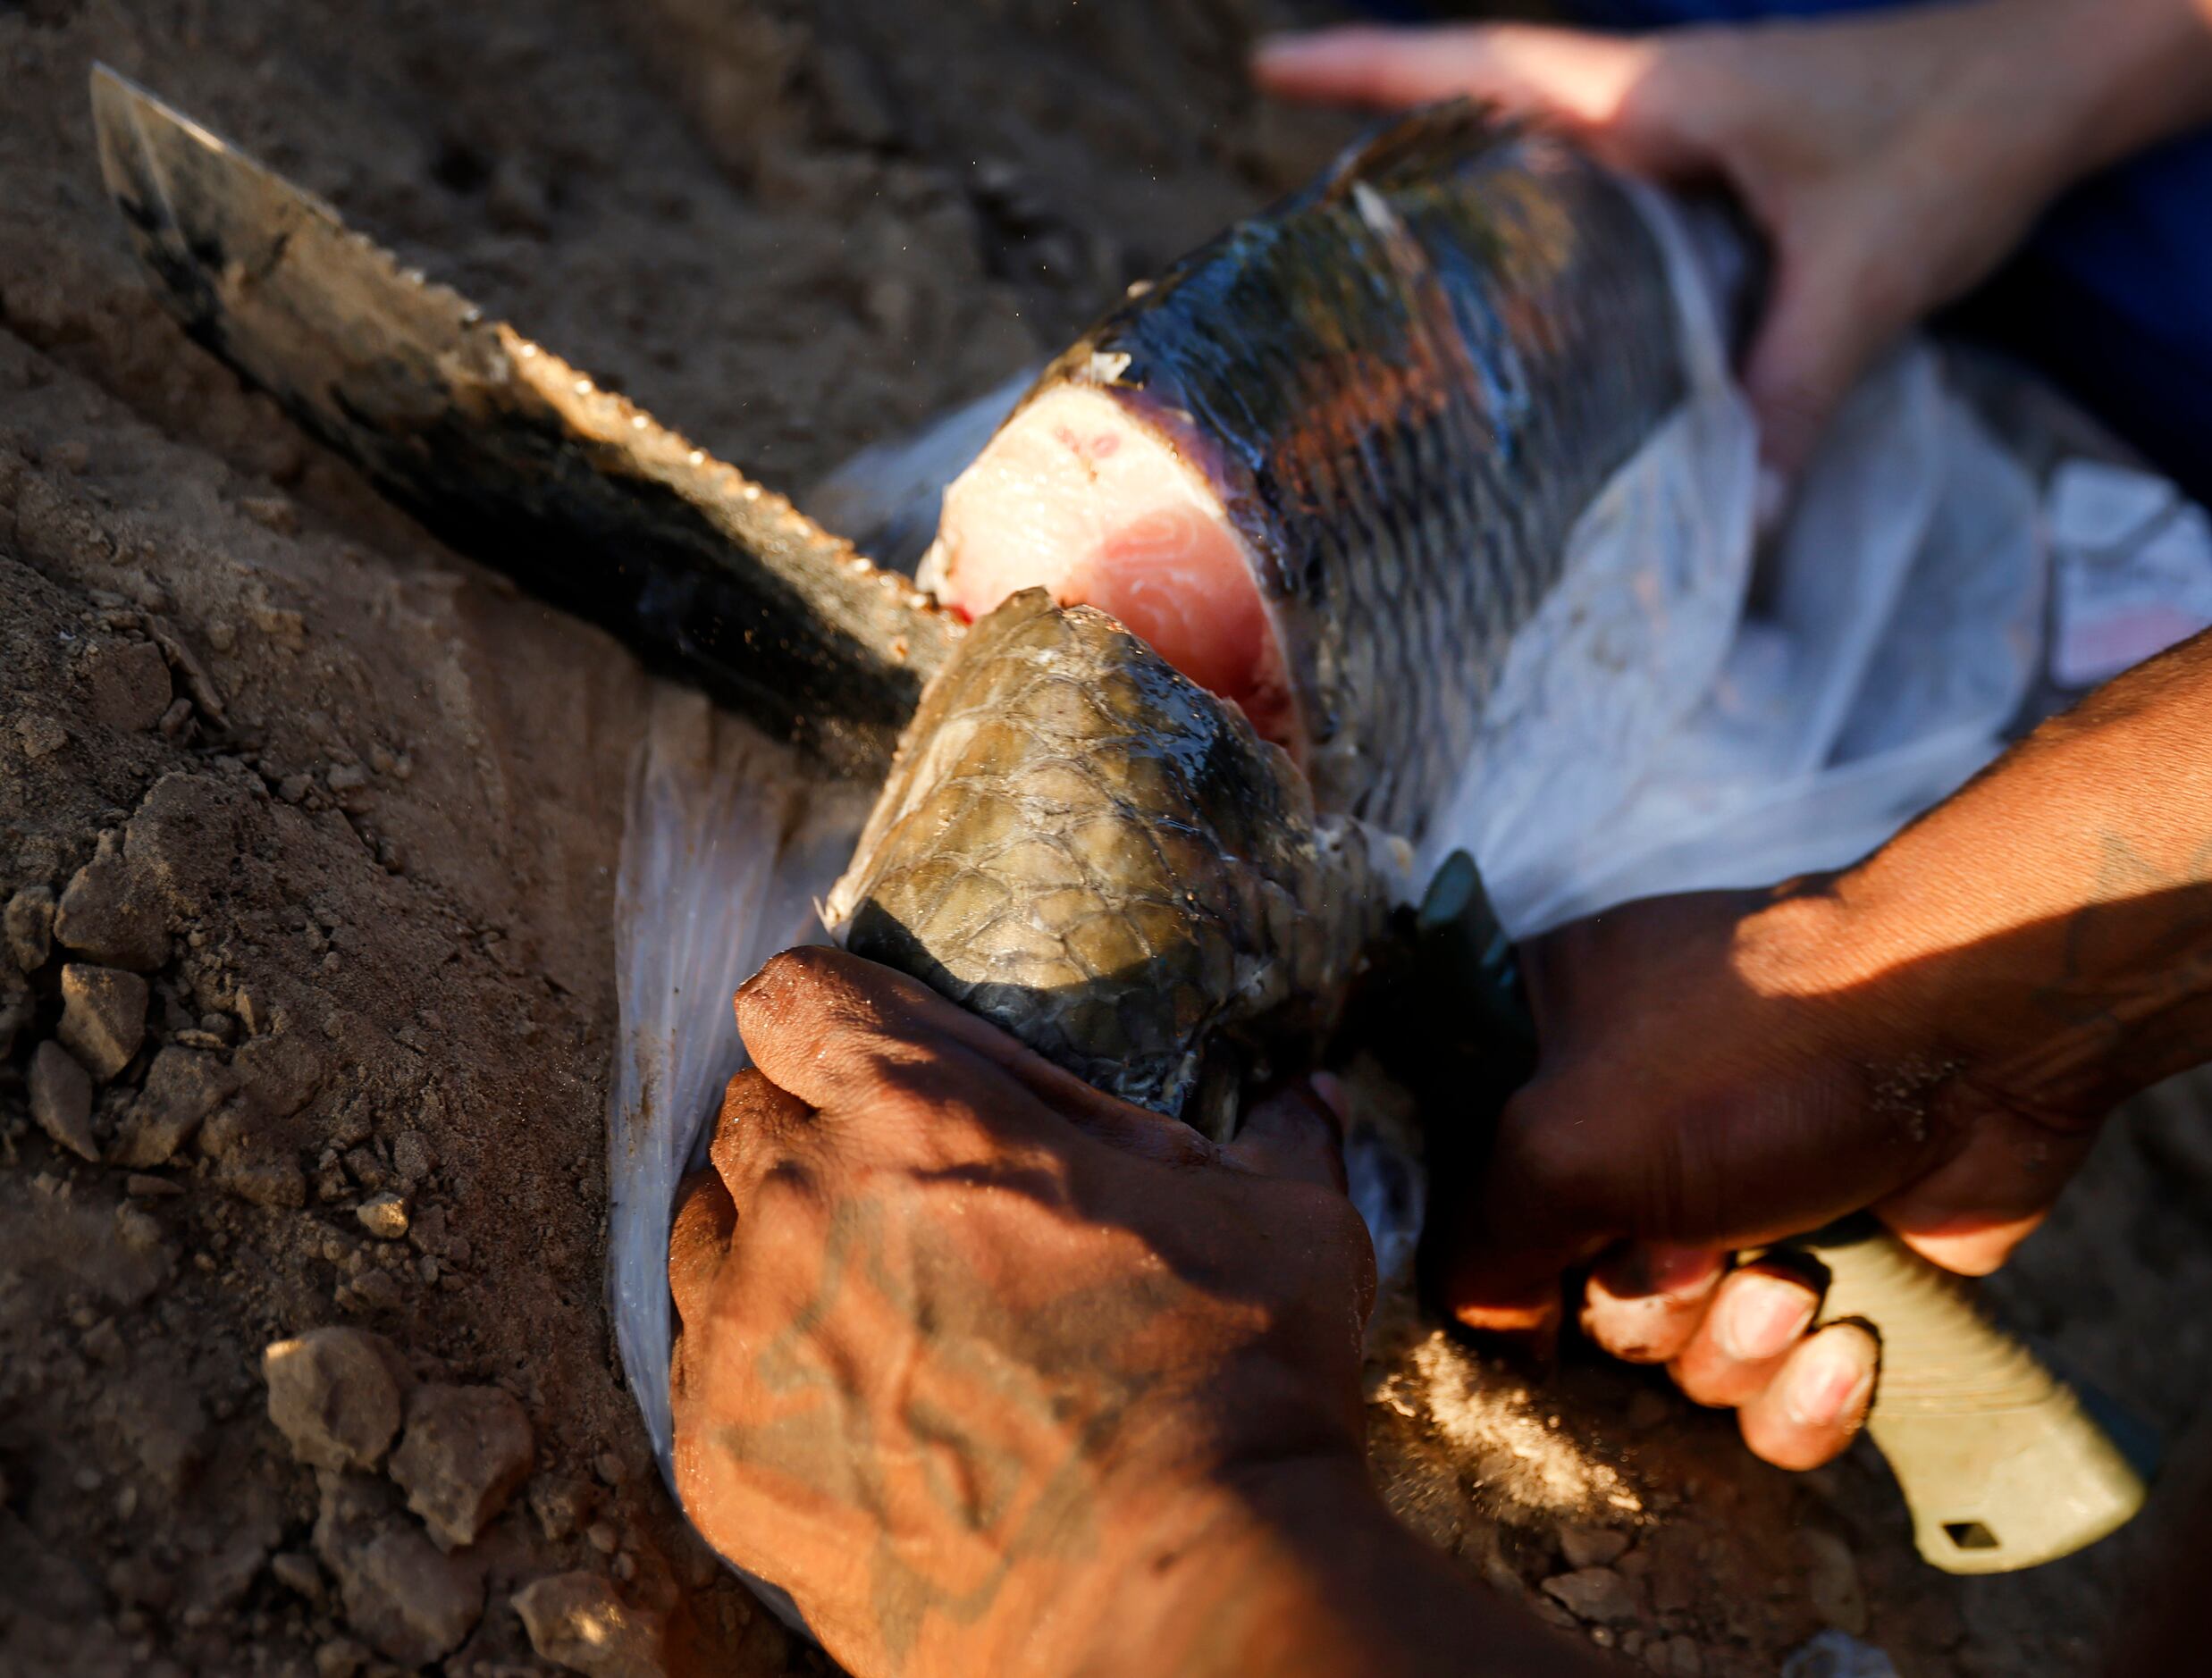 For alligator gar bait, Odell Allen cuts pieces of carp from an Asian grocery store with a...